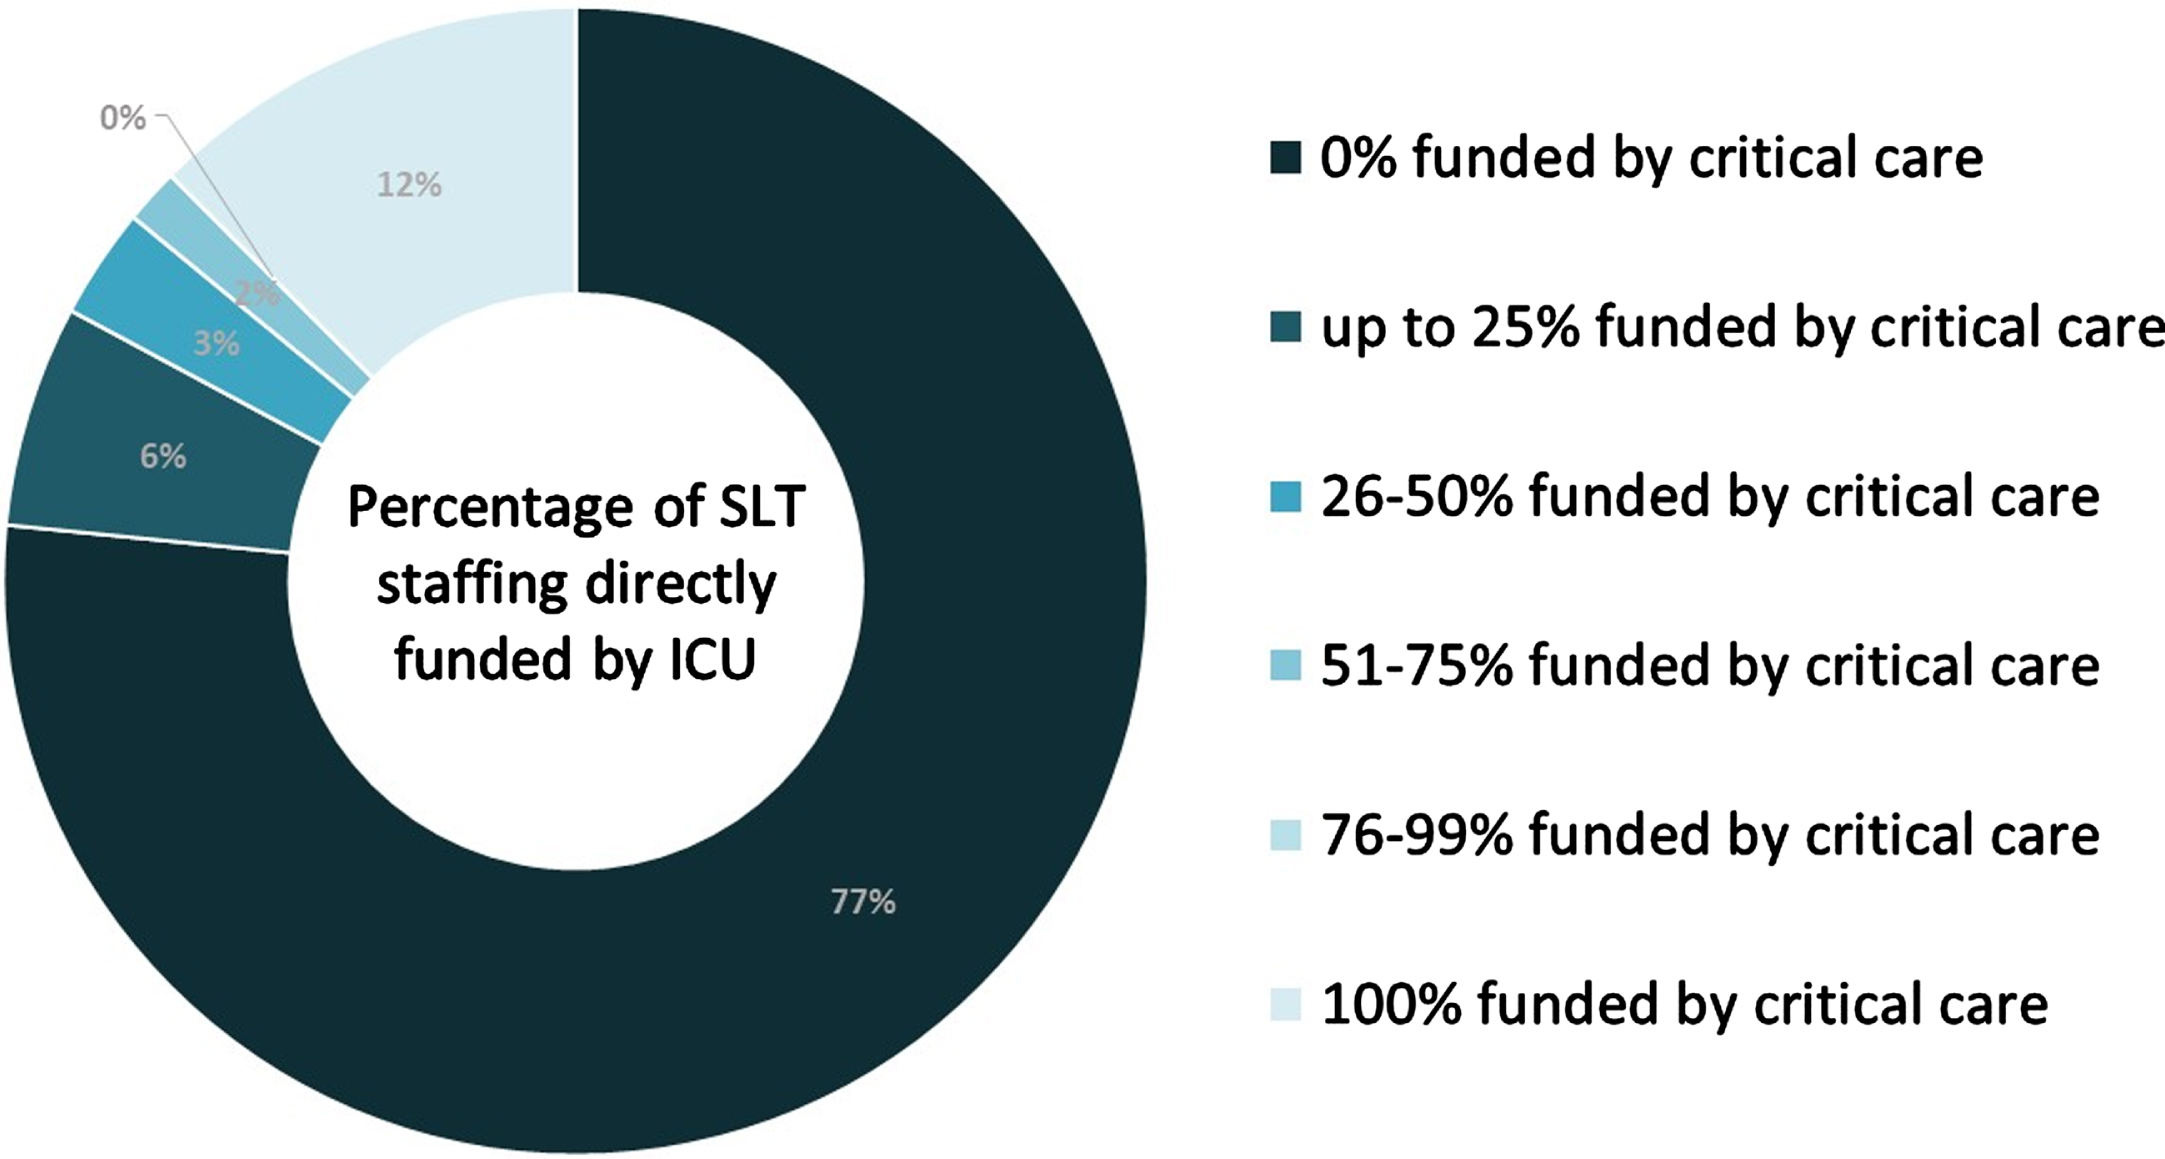 Percentage of ICU SLT staffing funded directly by ICU.